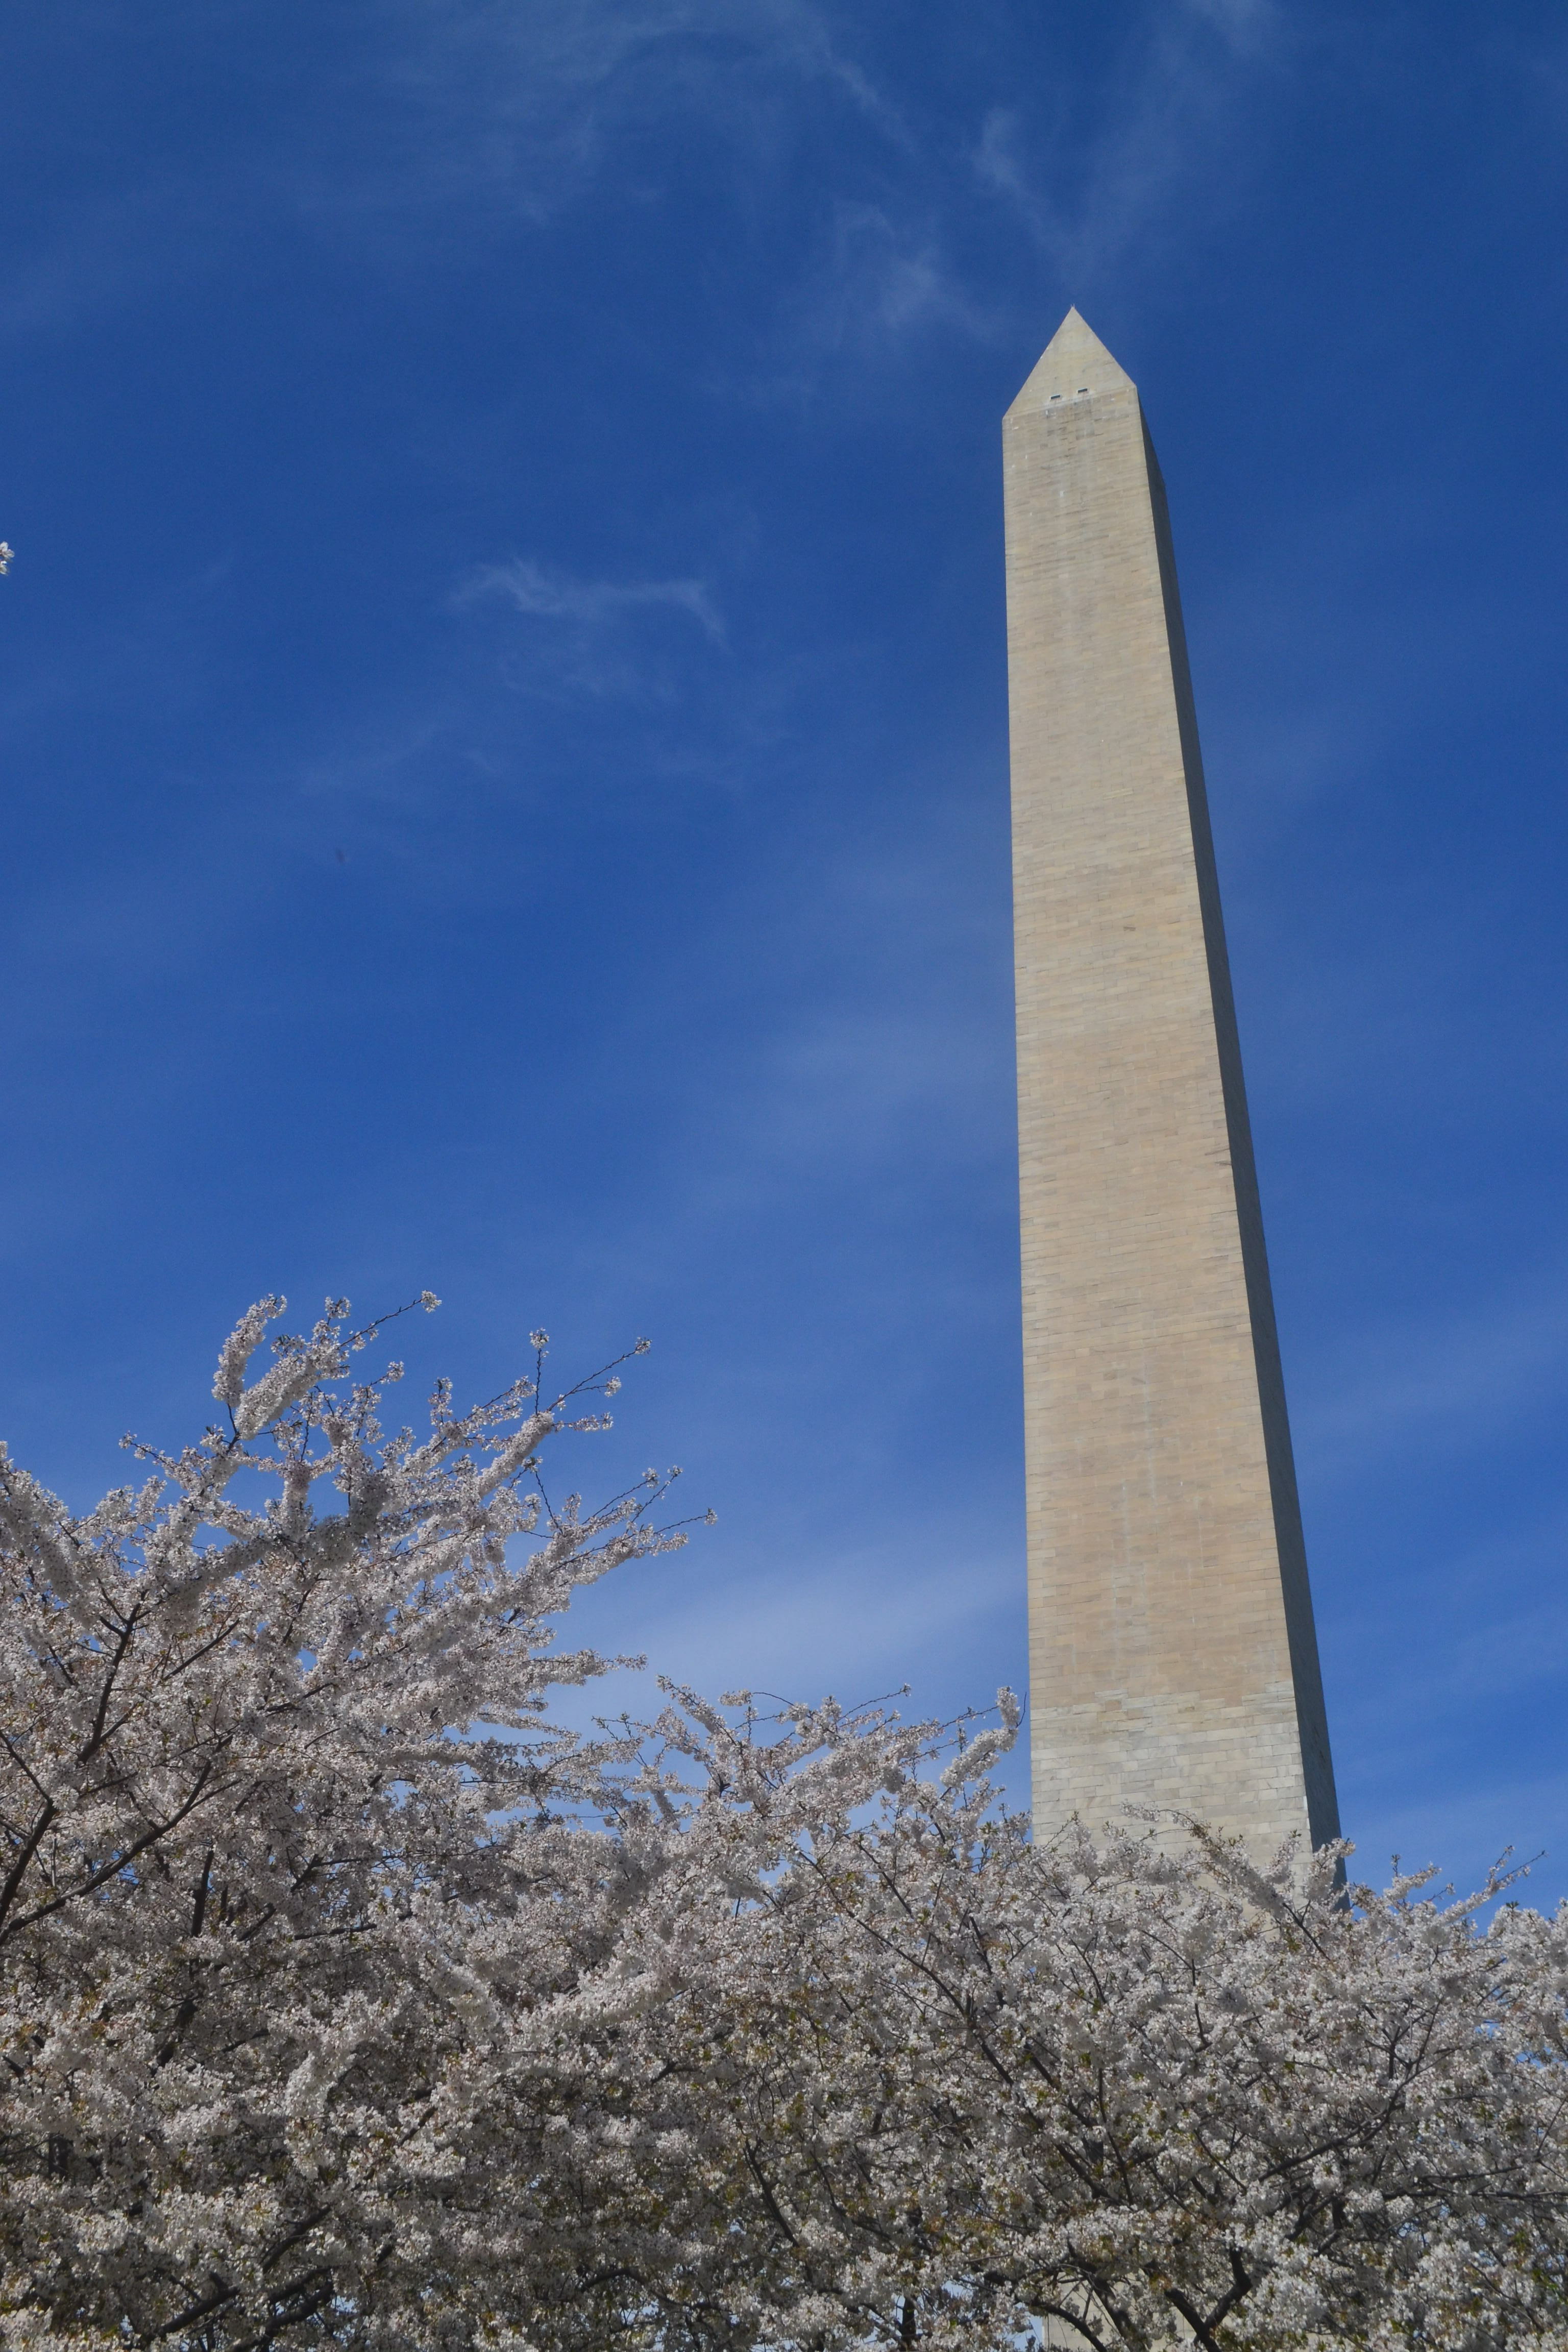 A white stone obelisk towers over trees with white petals.